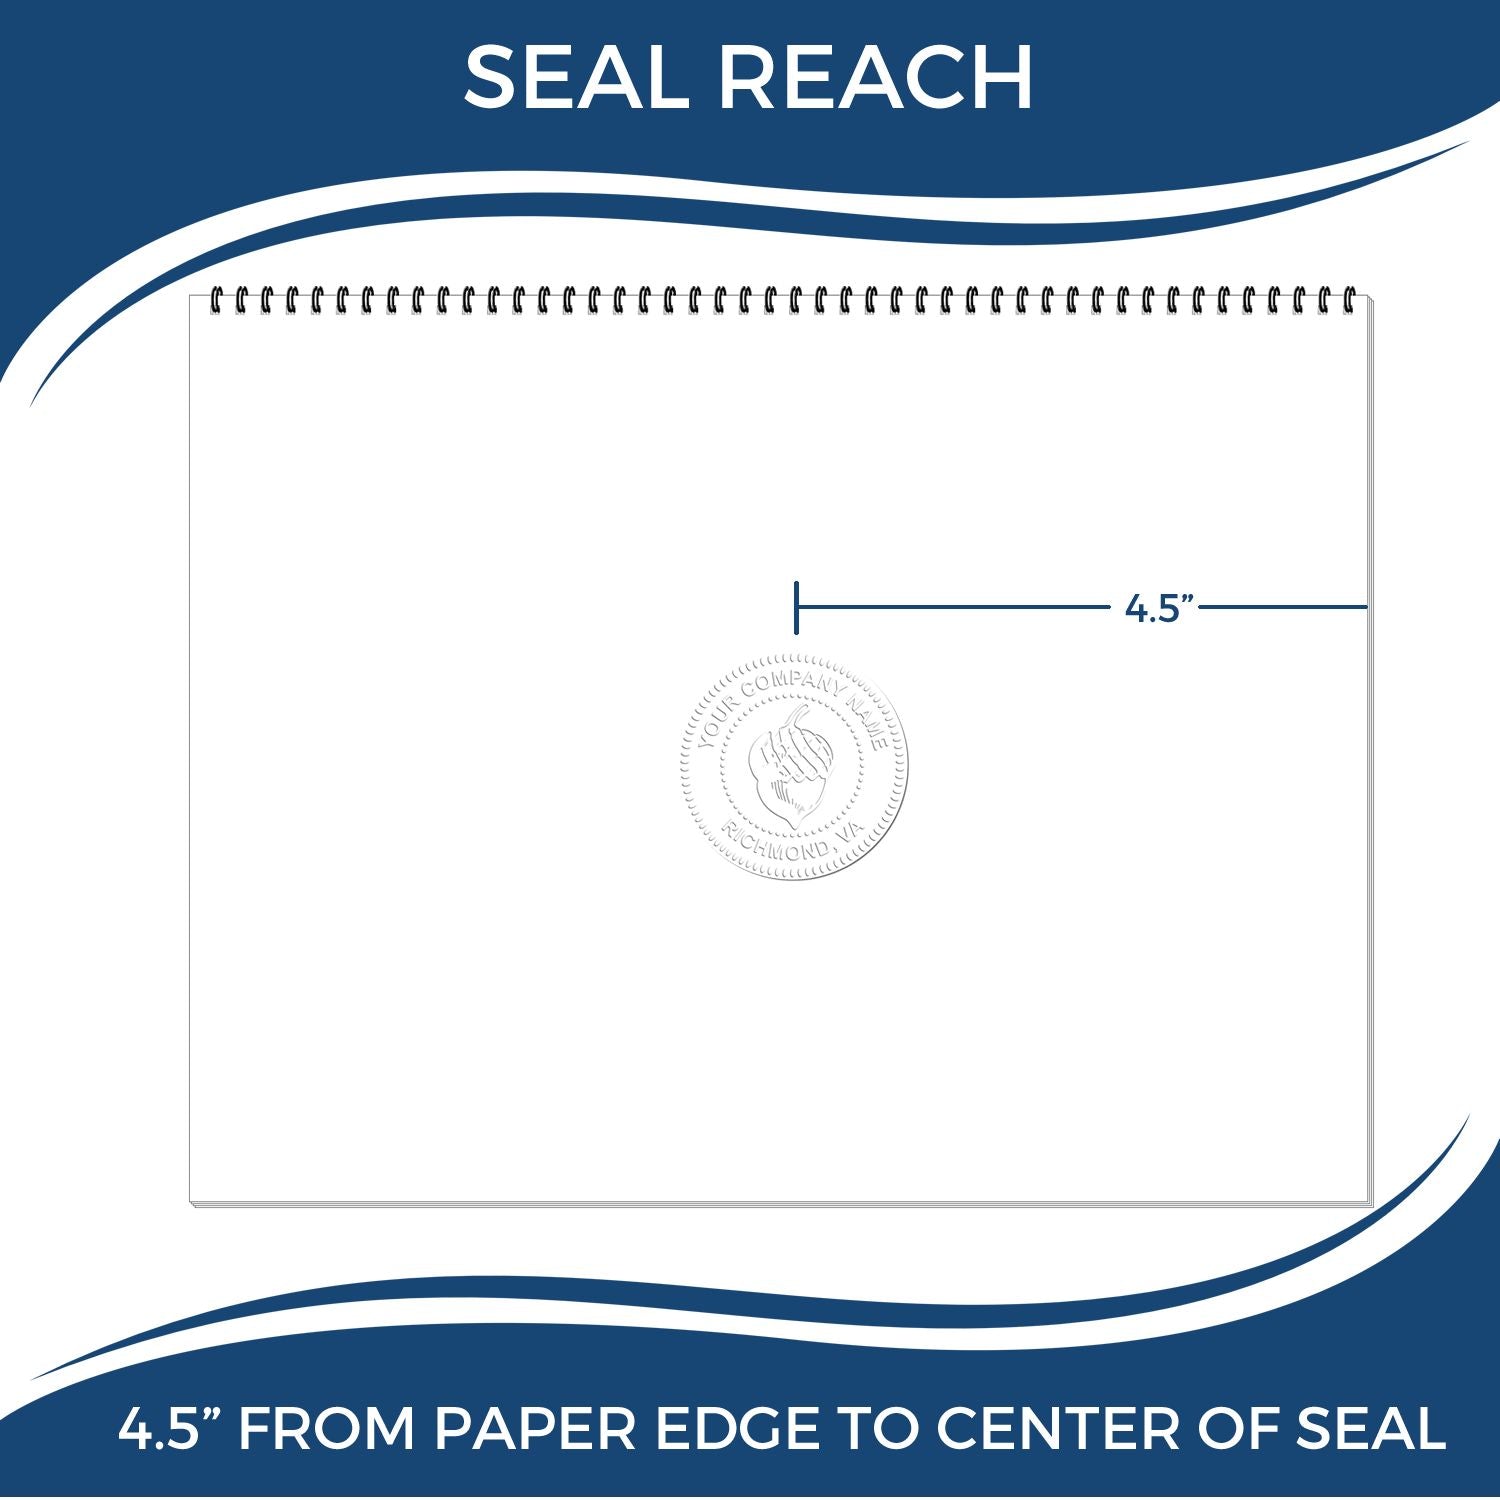 An infographic showing the seal reach which is represented by a ruler and a miniature seal image of the Extended Long Reach Pennsylvania Architect Seal Embosser